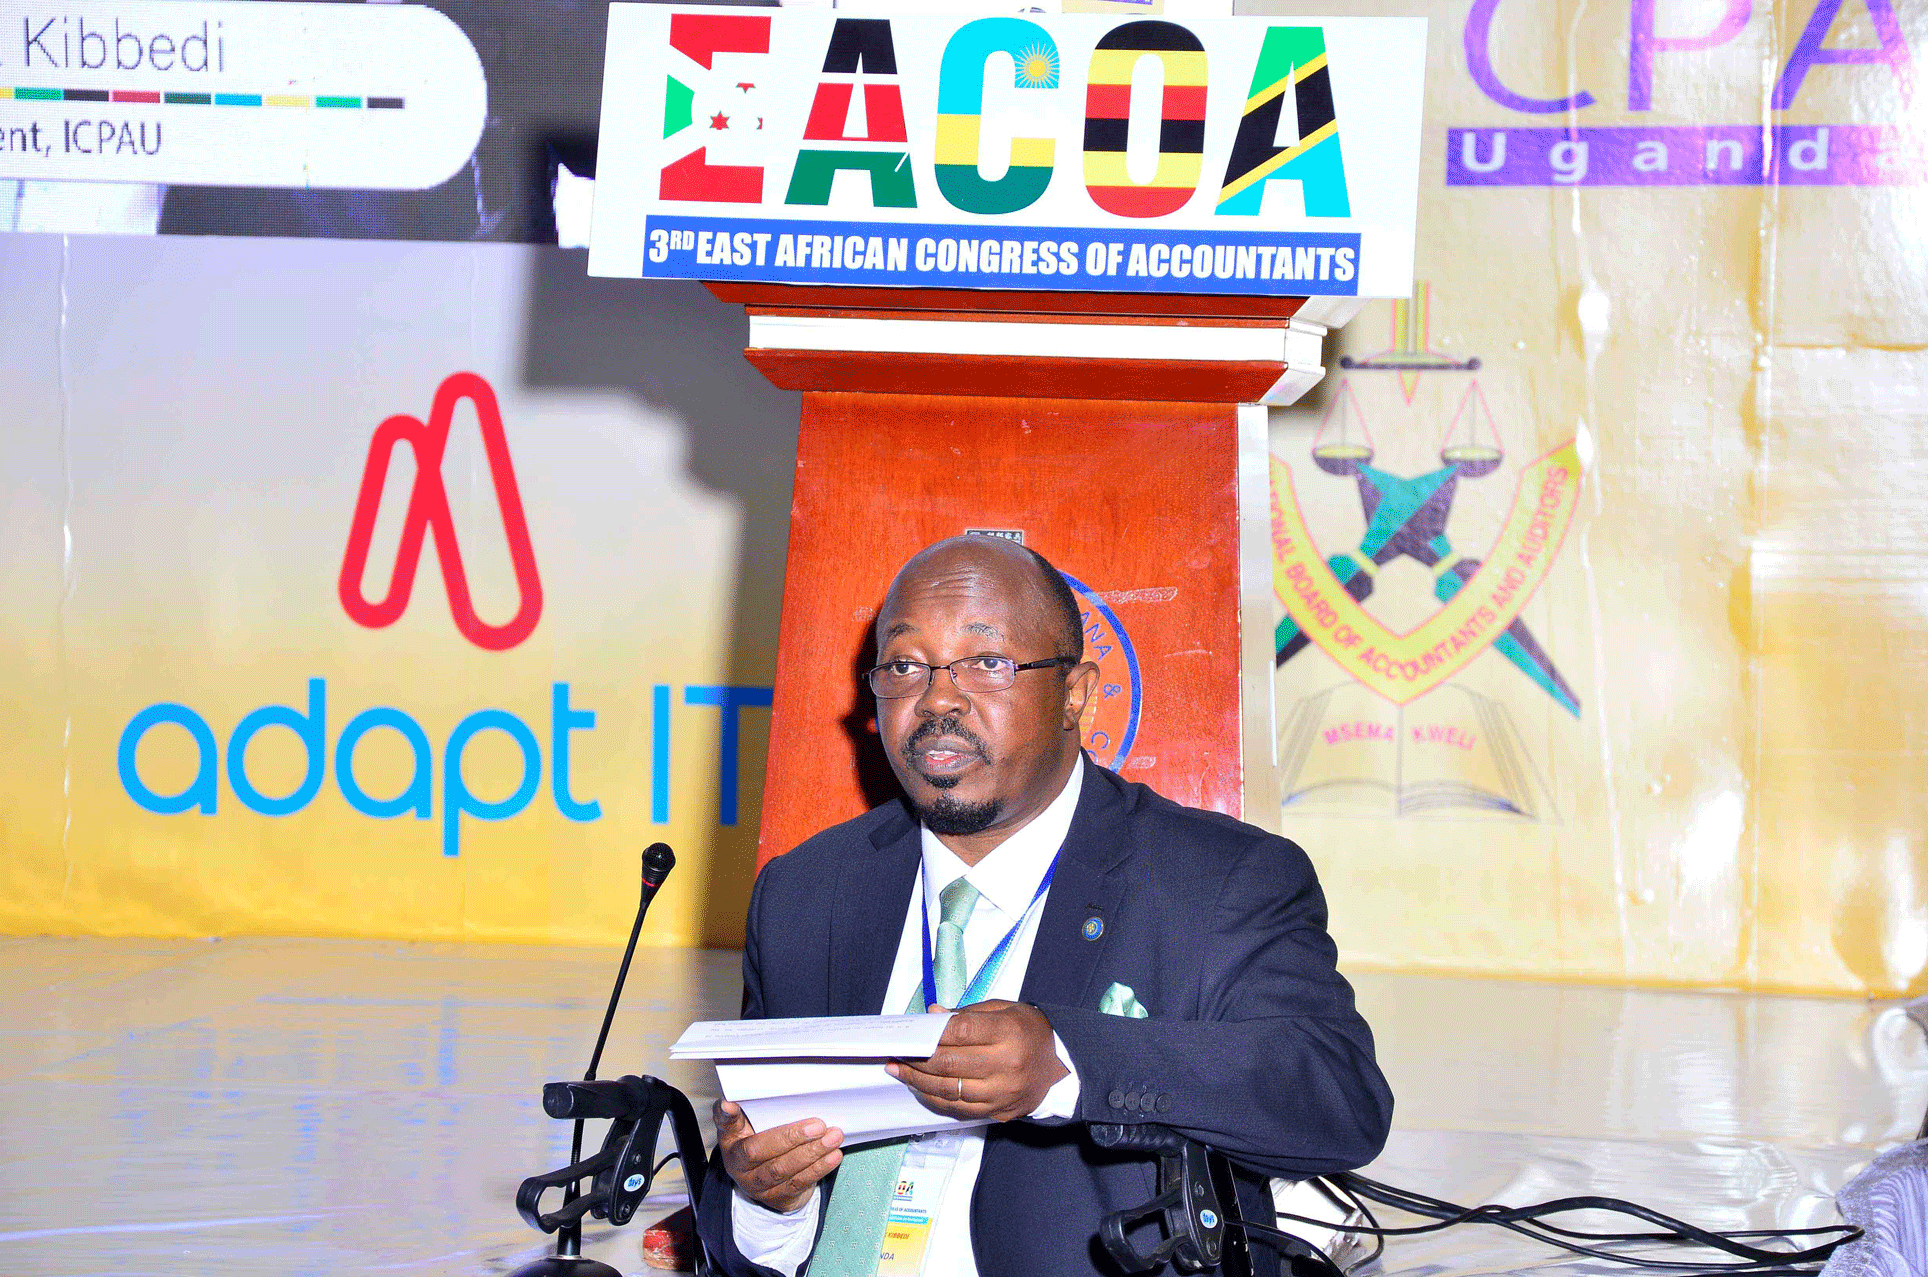 CPA Frederick Kibbedi the President of ICPAU delivering his message